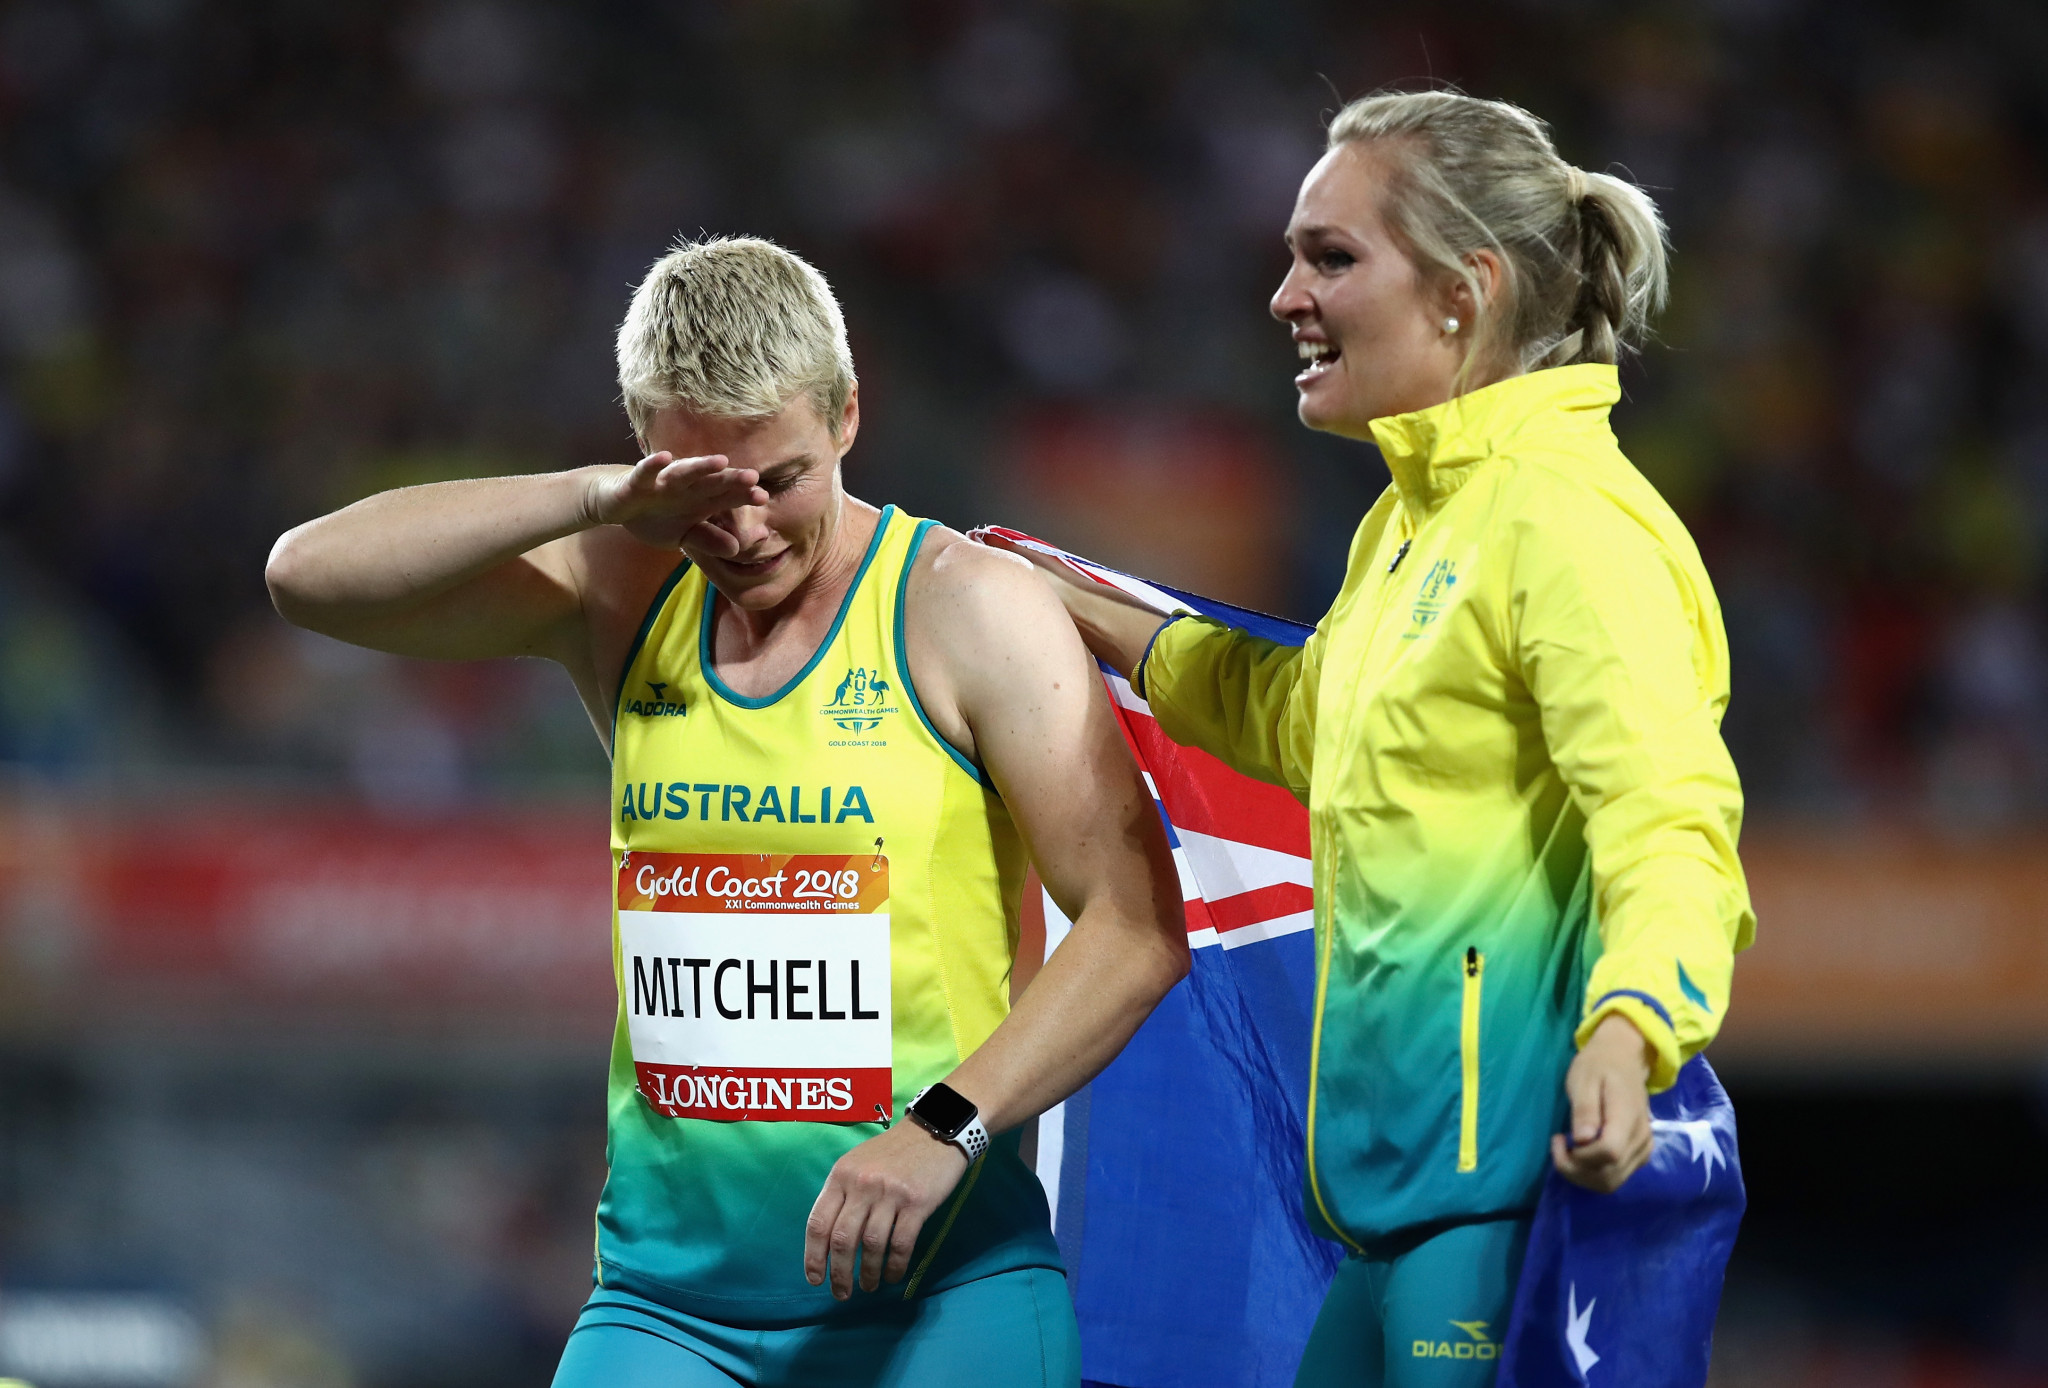 Kathryn Mitchell of Australia is congratulated as she wins gold by silver medallist Kelsey-Lee Roberts of Australia in the Women's Javelin final during athletics on day seven of the Gold Coast 2018 Commonwealth Games ©Getty Images